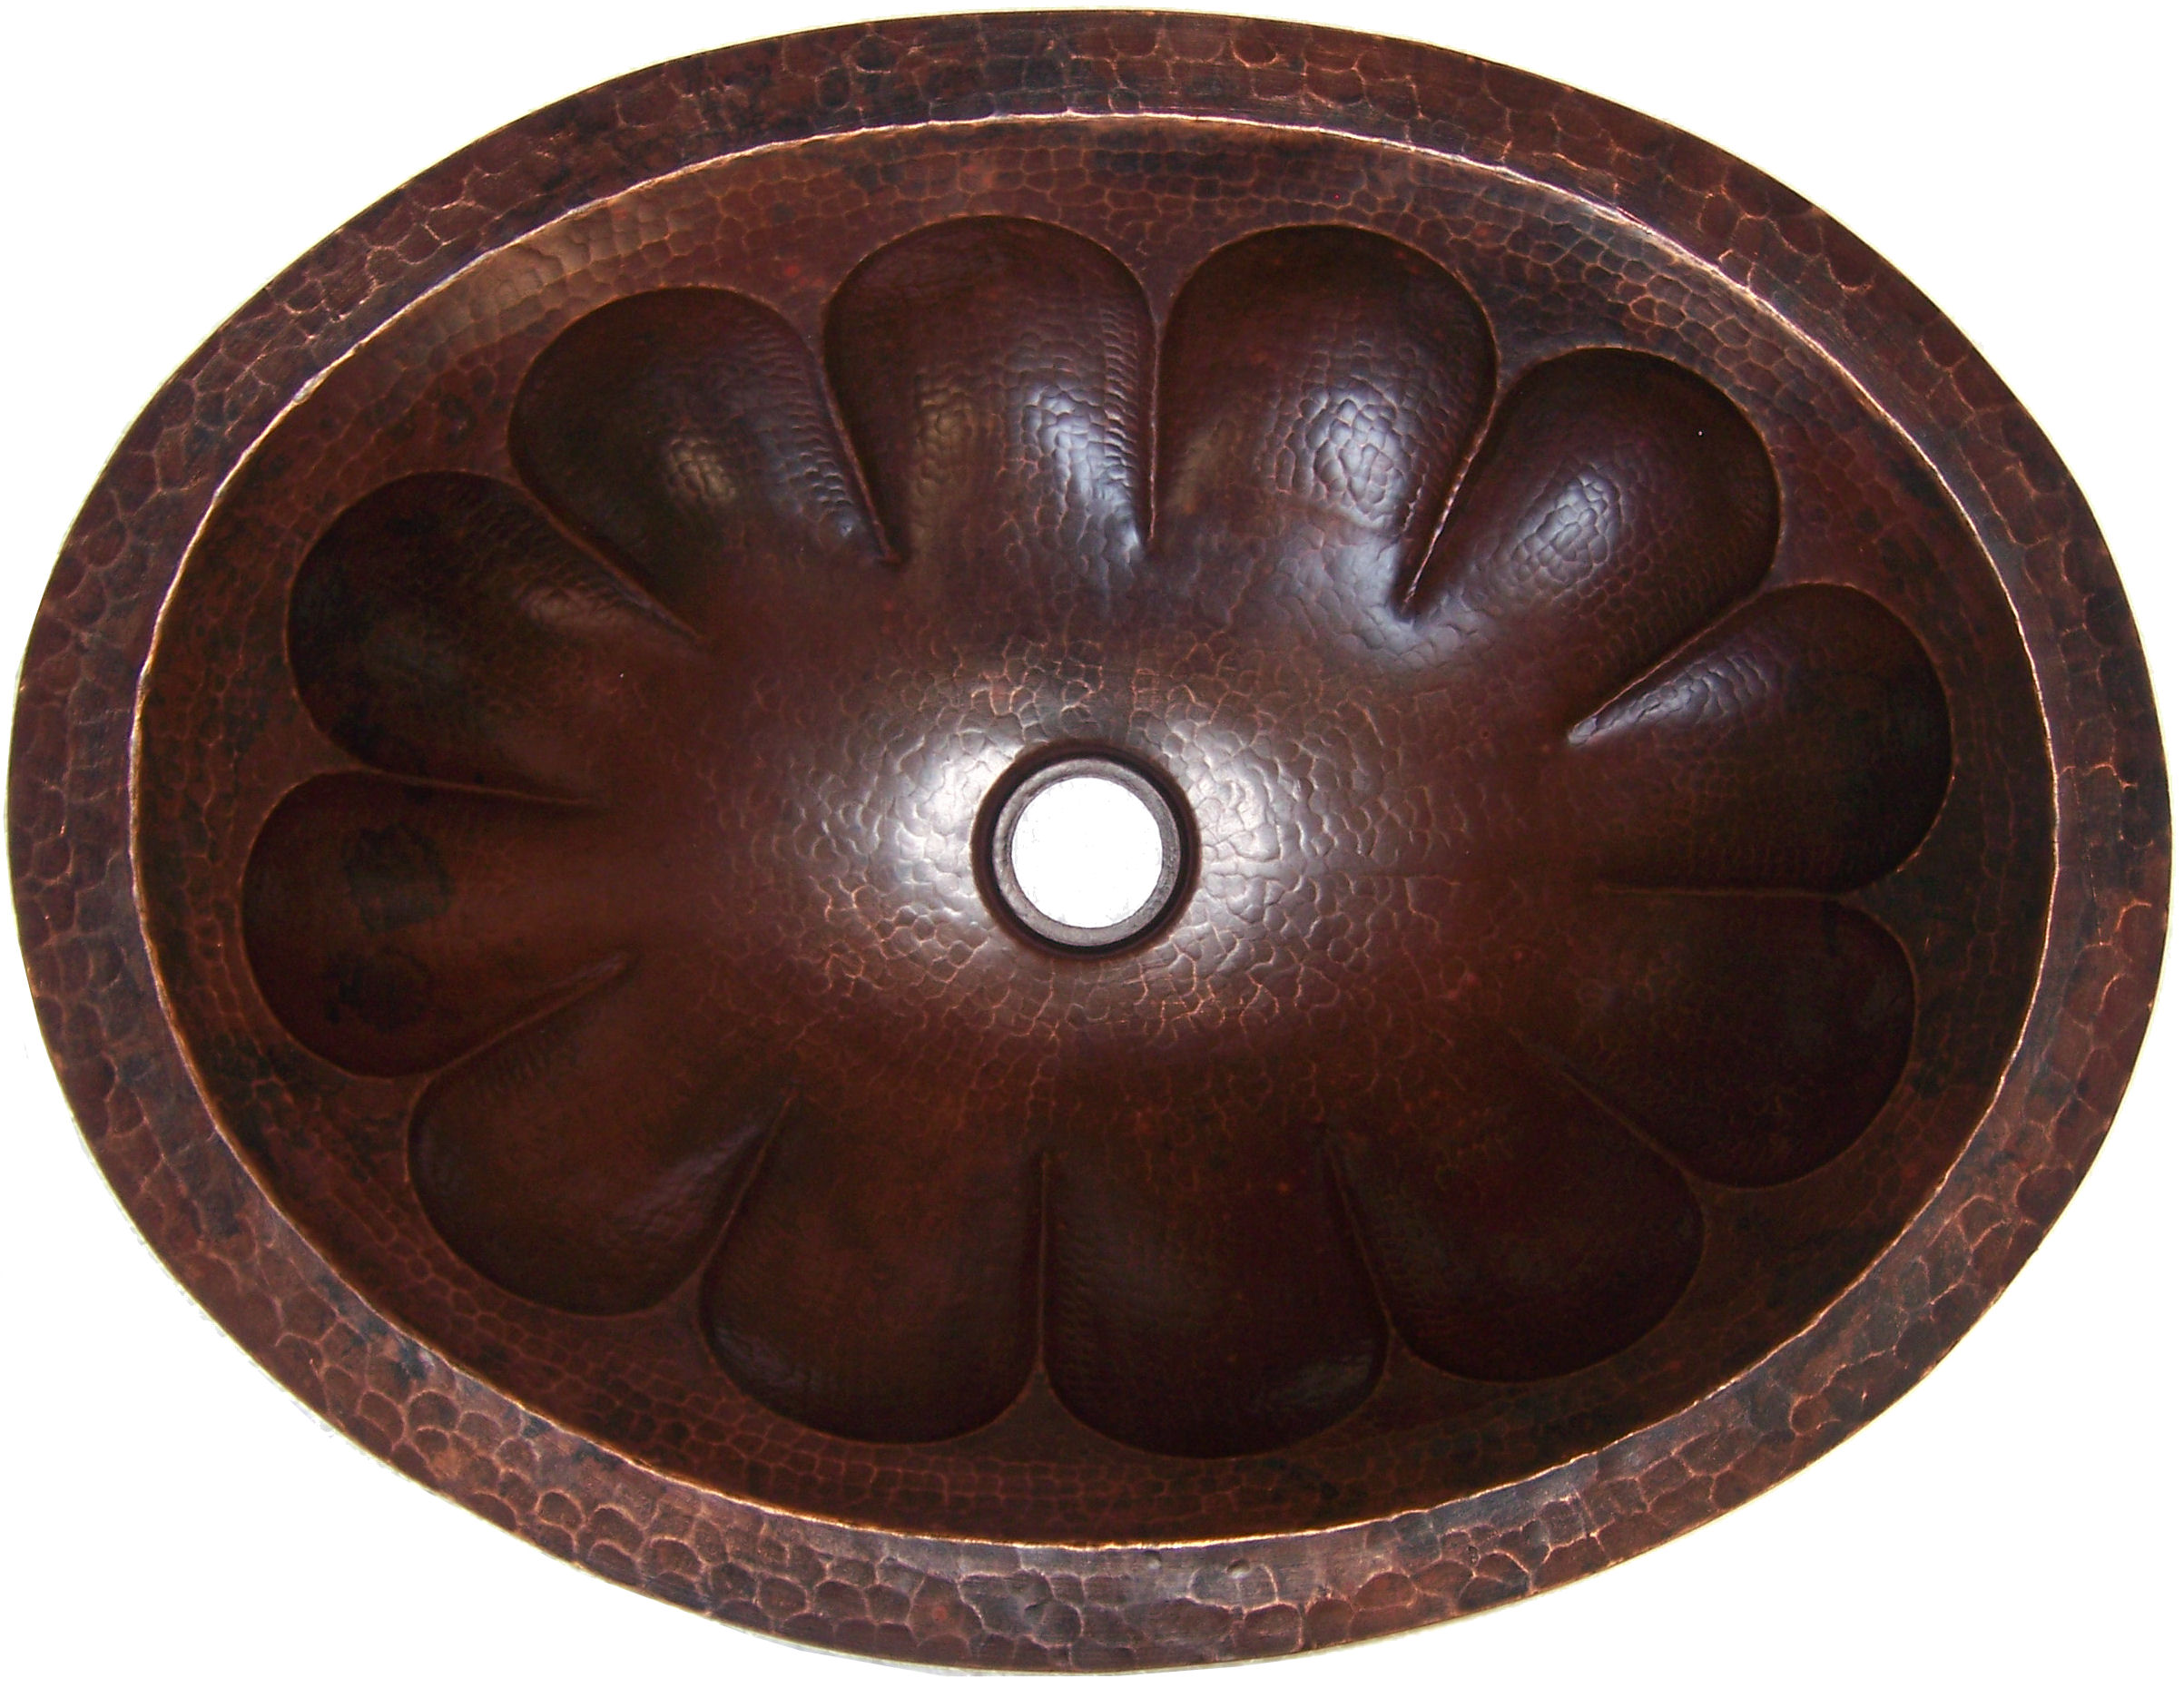 Undermount Hammered Oval Shell Bathroom Copper Sink